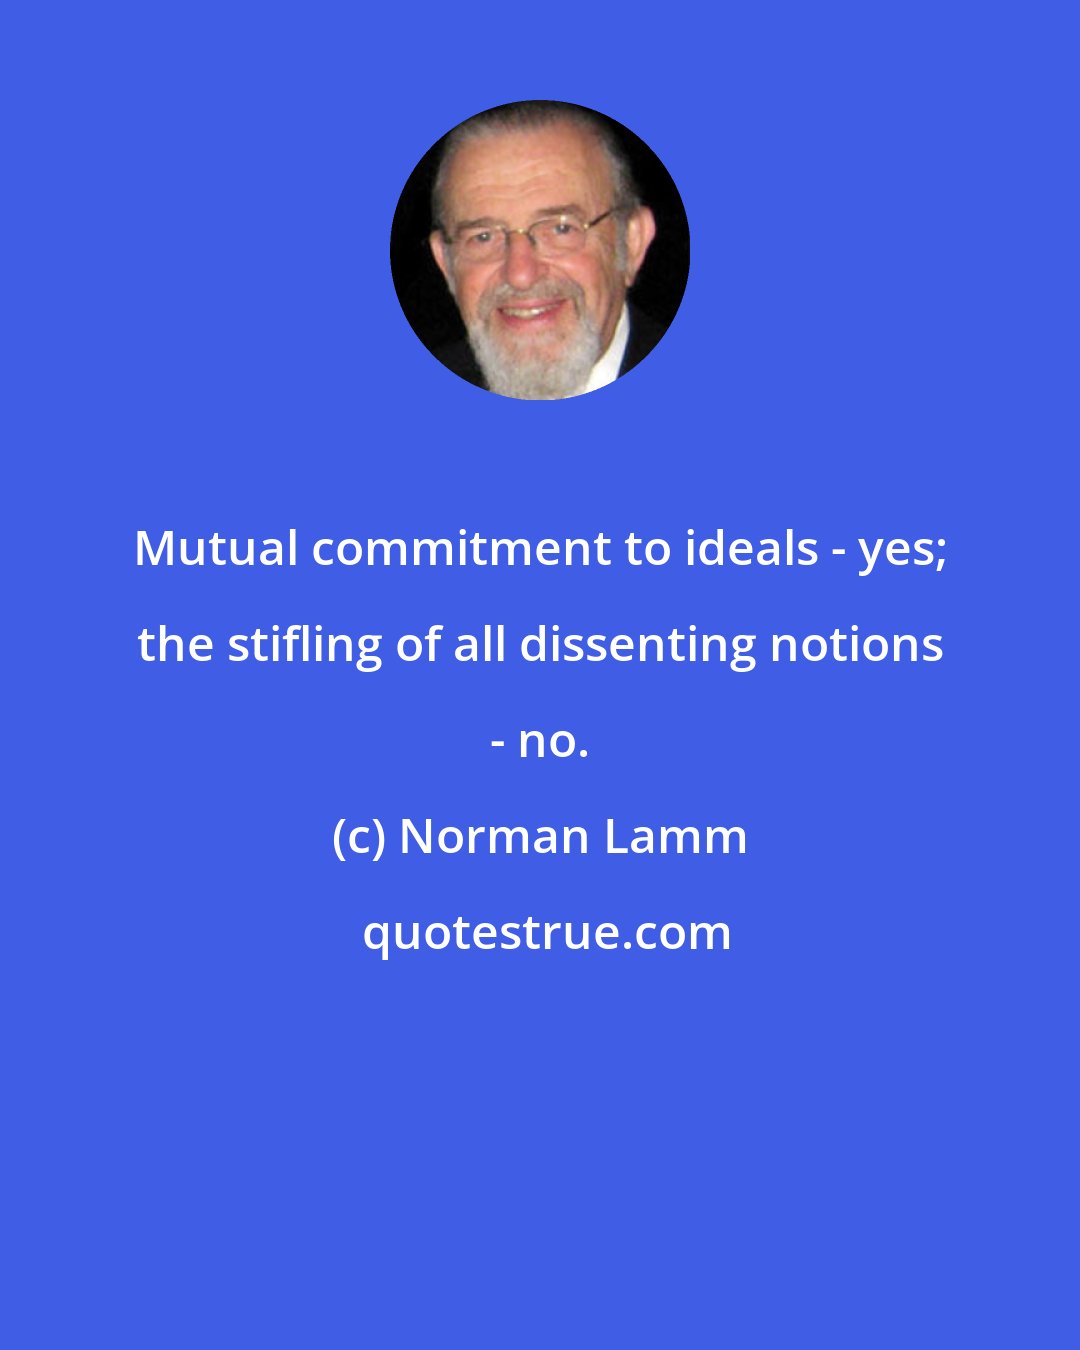 Norman Lamm: Mutual commitment to ideals - yes; the stifling of all dissenting notions - no.